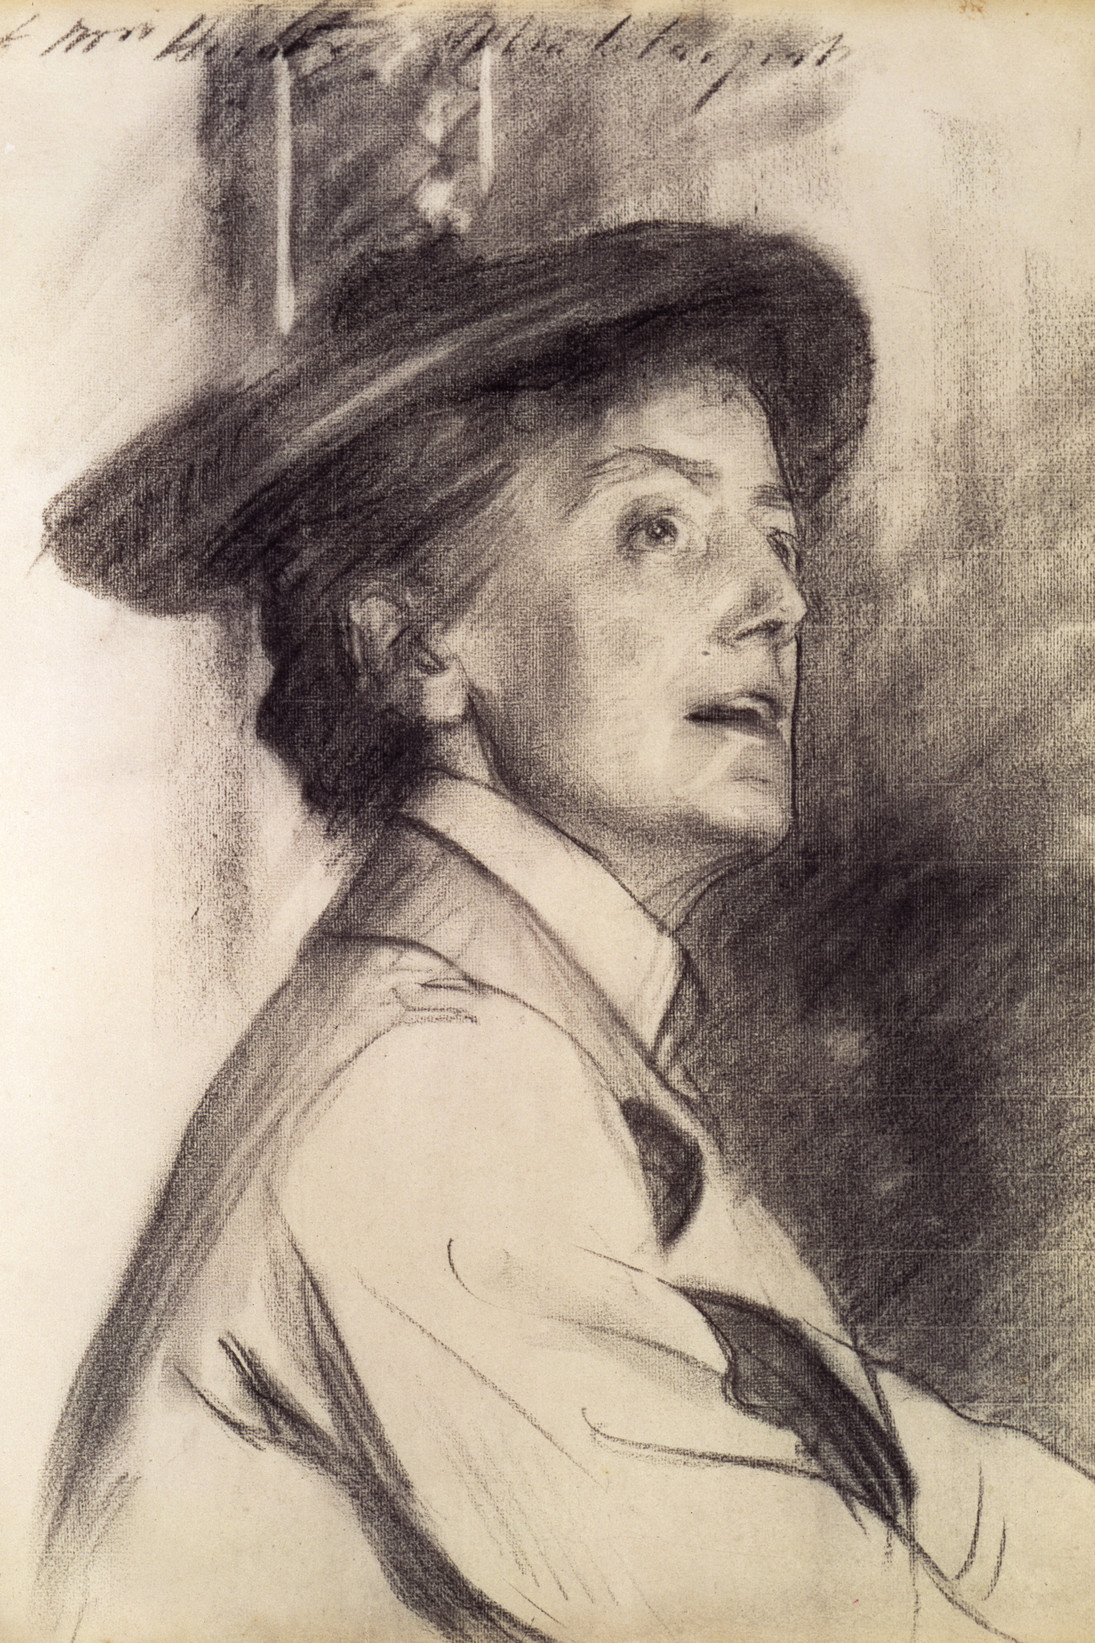 On her birthday, thoughts about Ethel Smyth